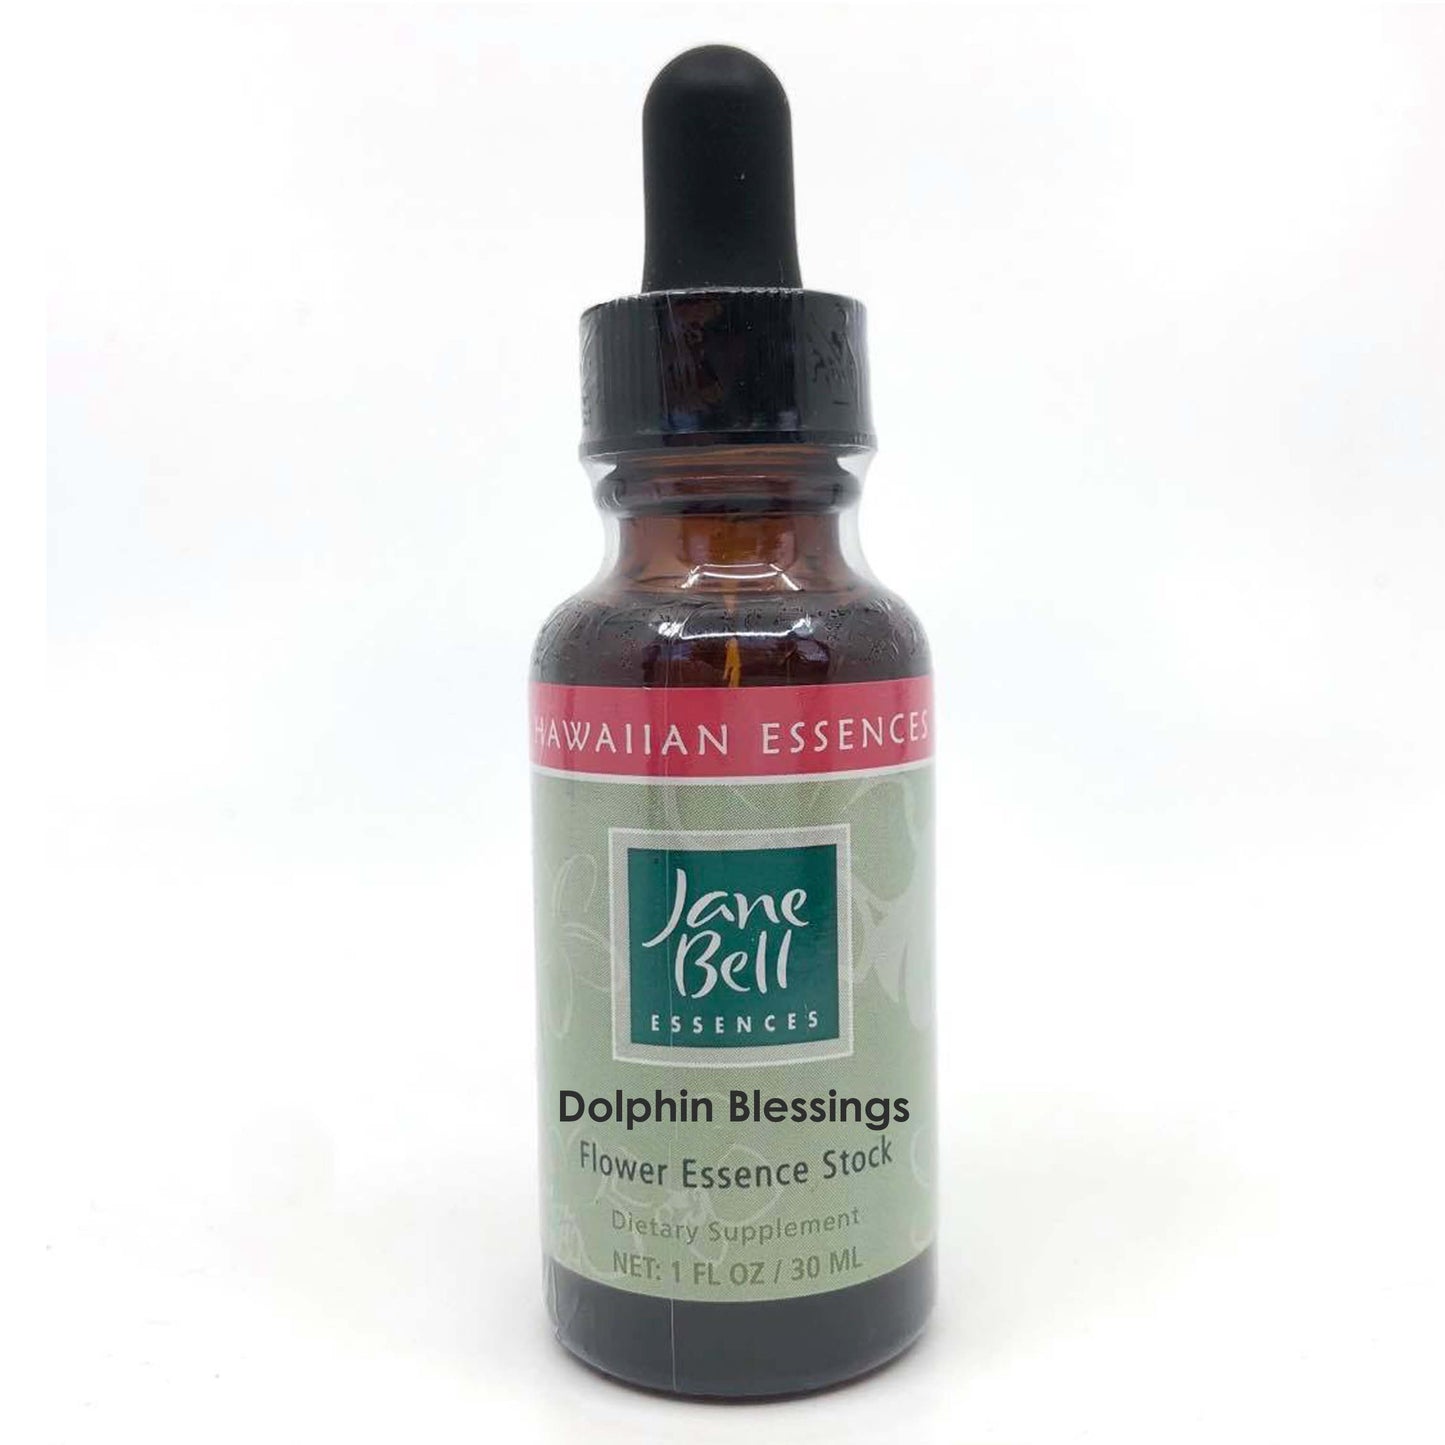 Dolphin Blessings animal essence 30ml